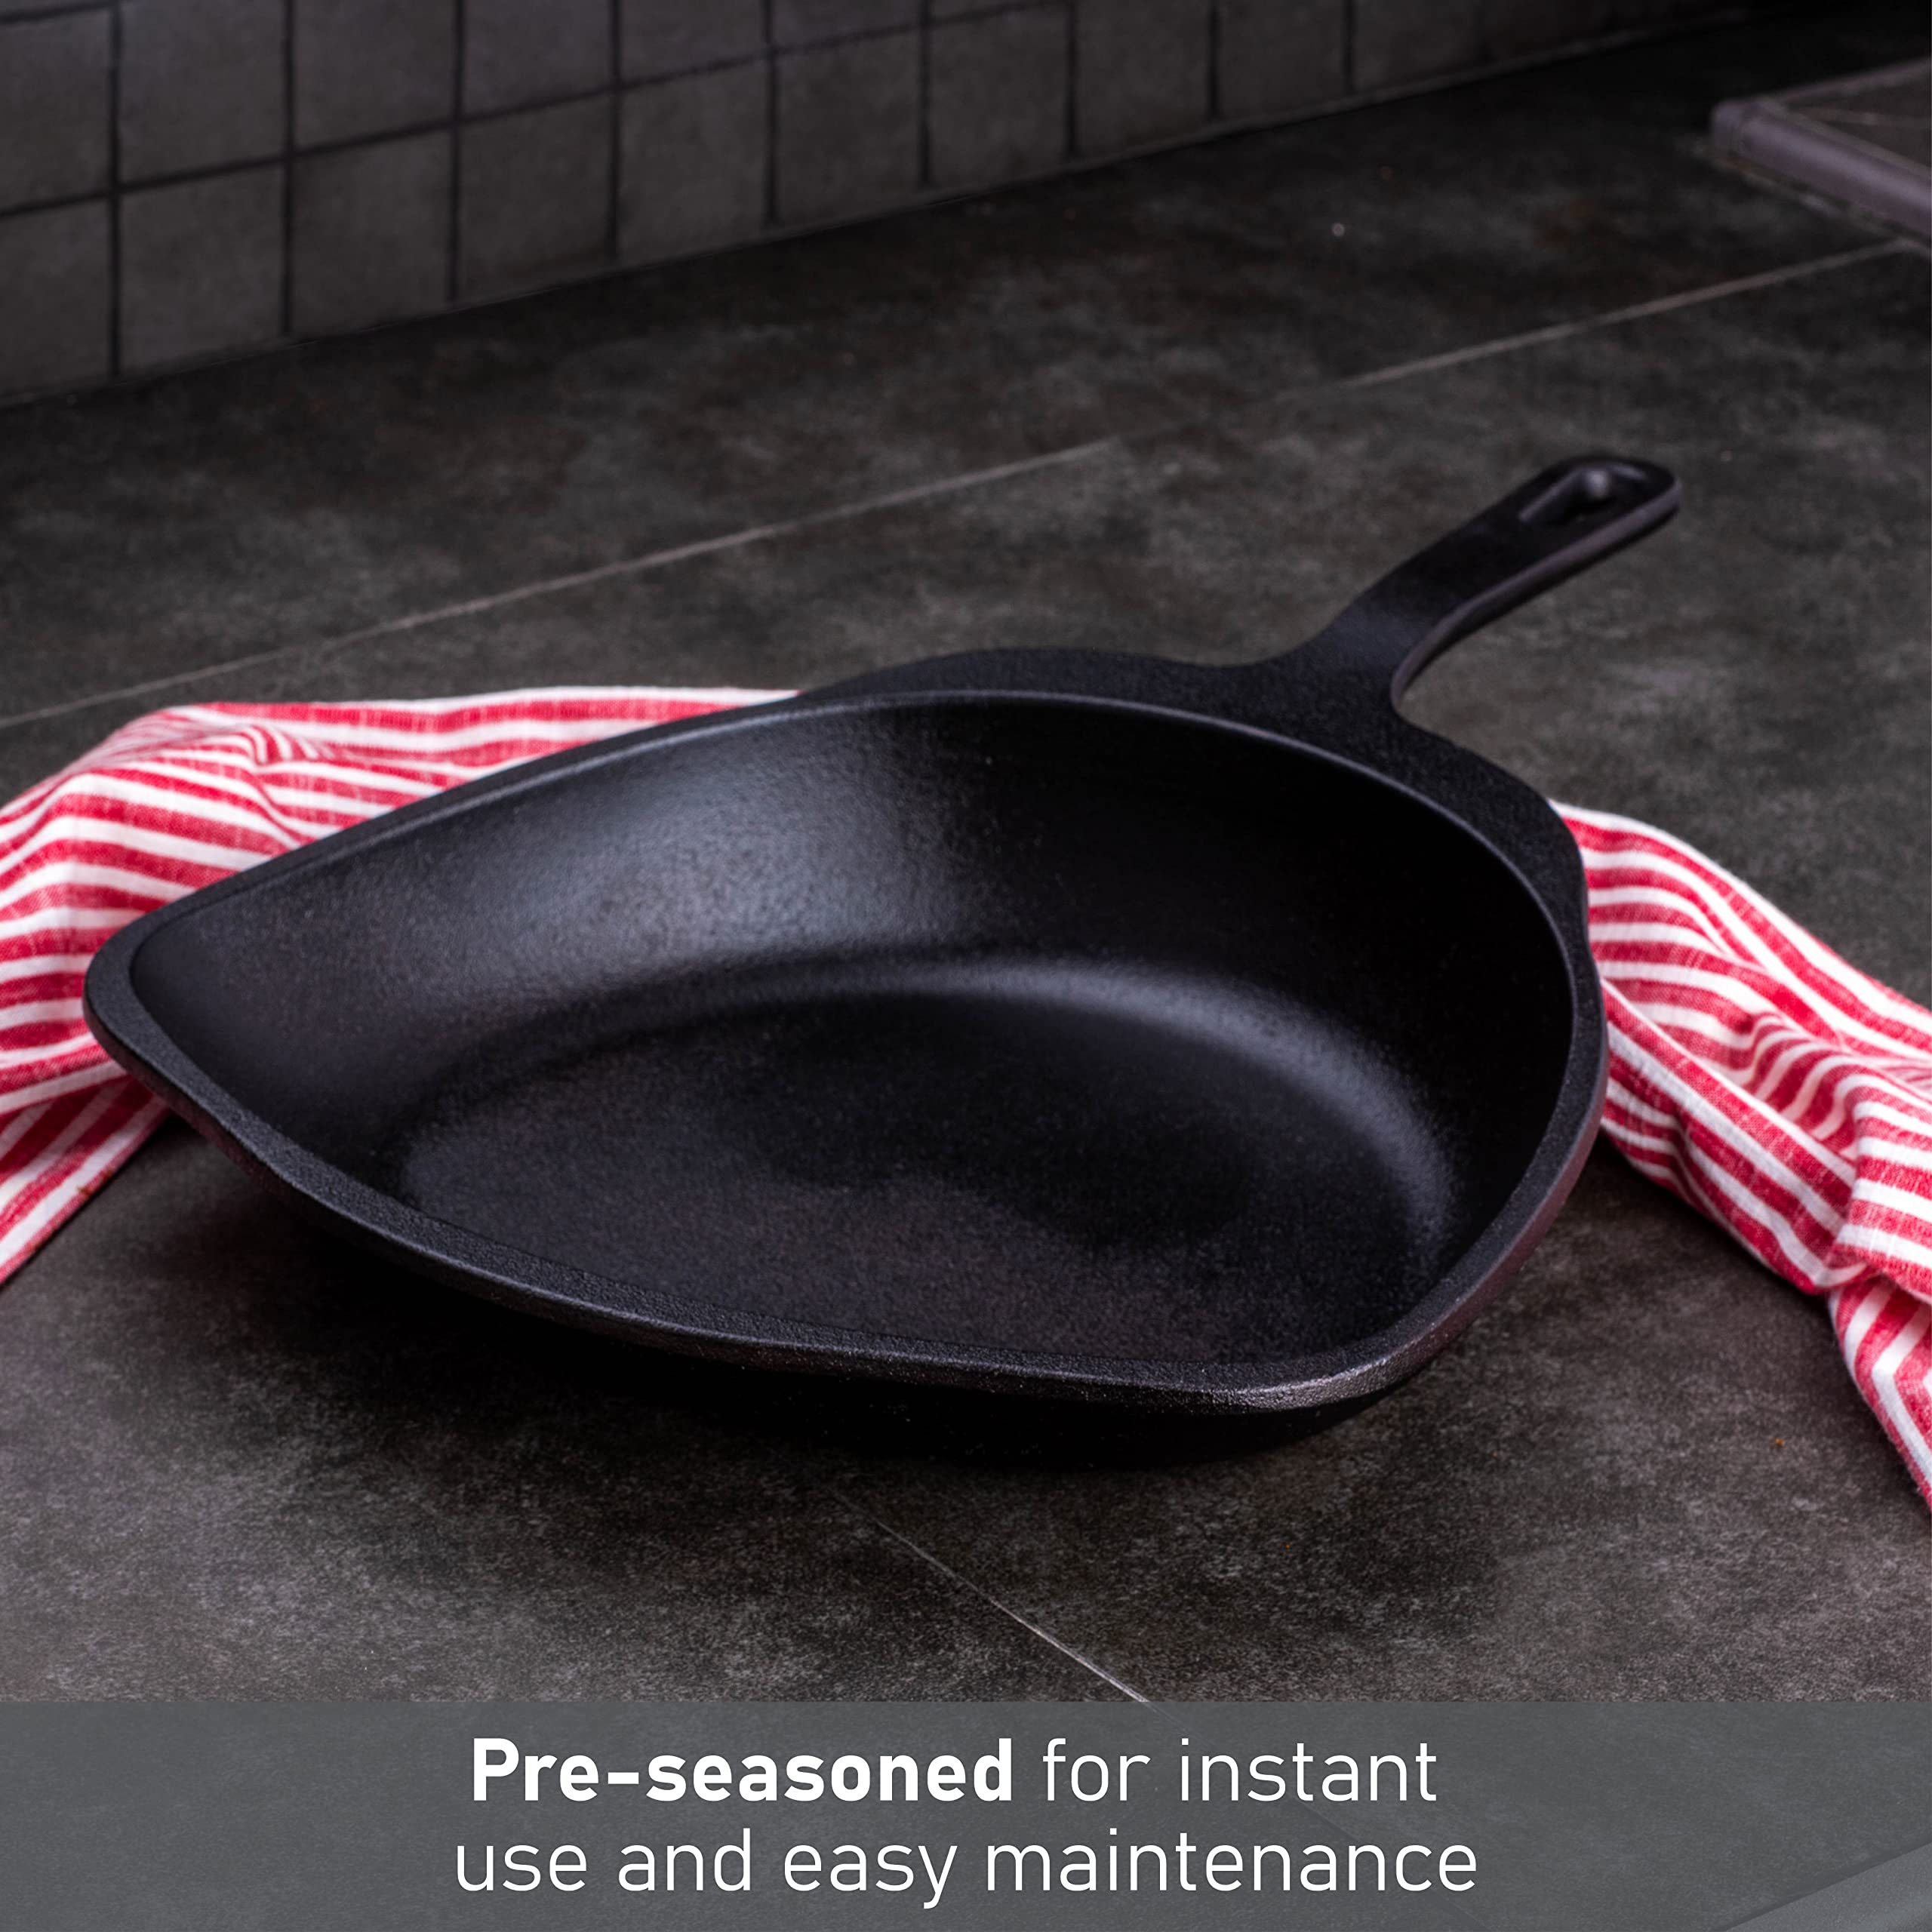 MasterPRO Pre-Seasoned Cast Iron Skillet - Unique Cooking, Saute and Frying Pan for Indoor and Outdoor Use – BBQ Grill, Fire, Oven Safe Camping Cookware, 11” Griddle, Black